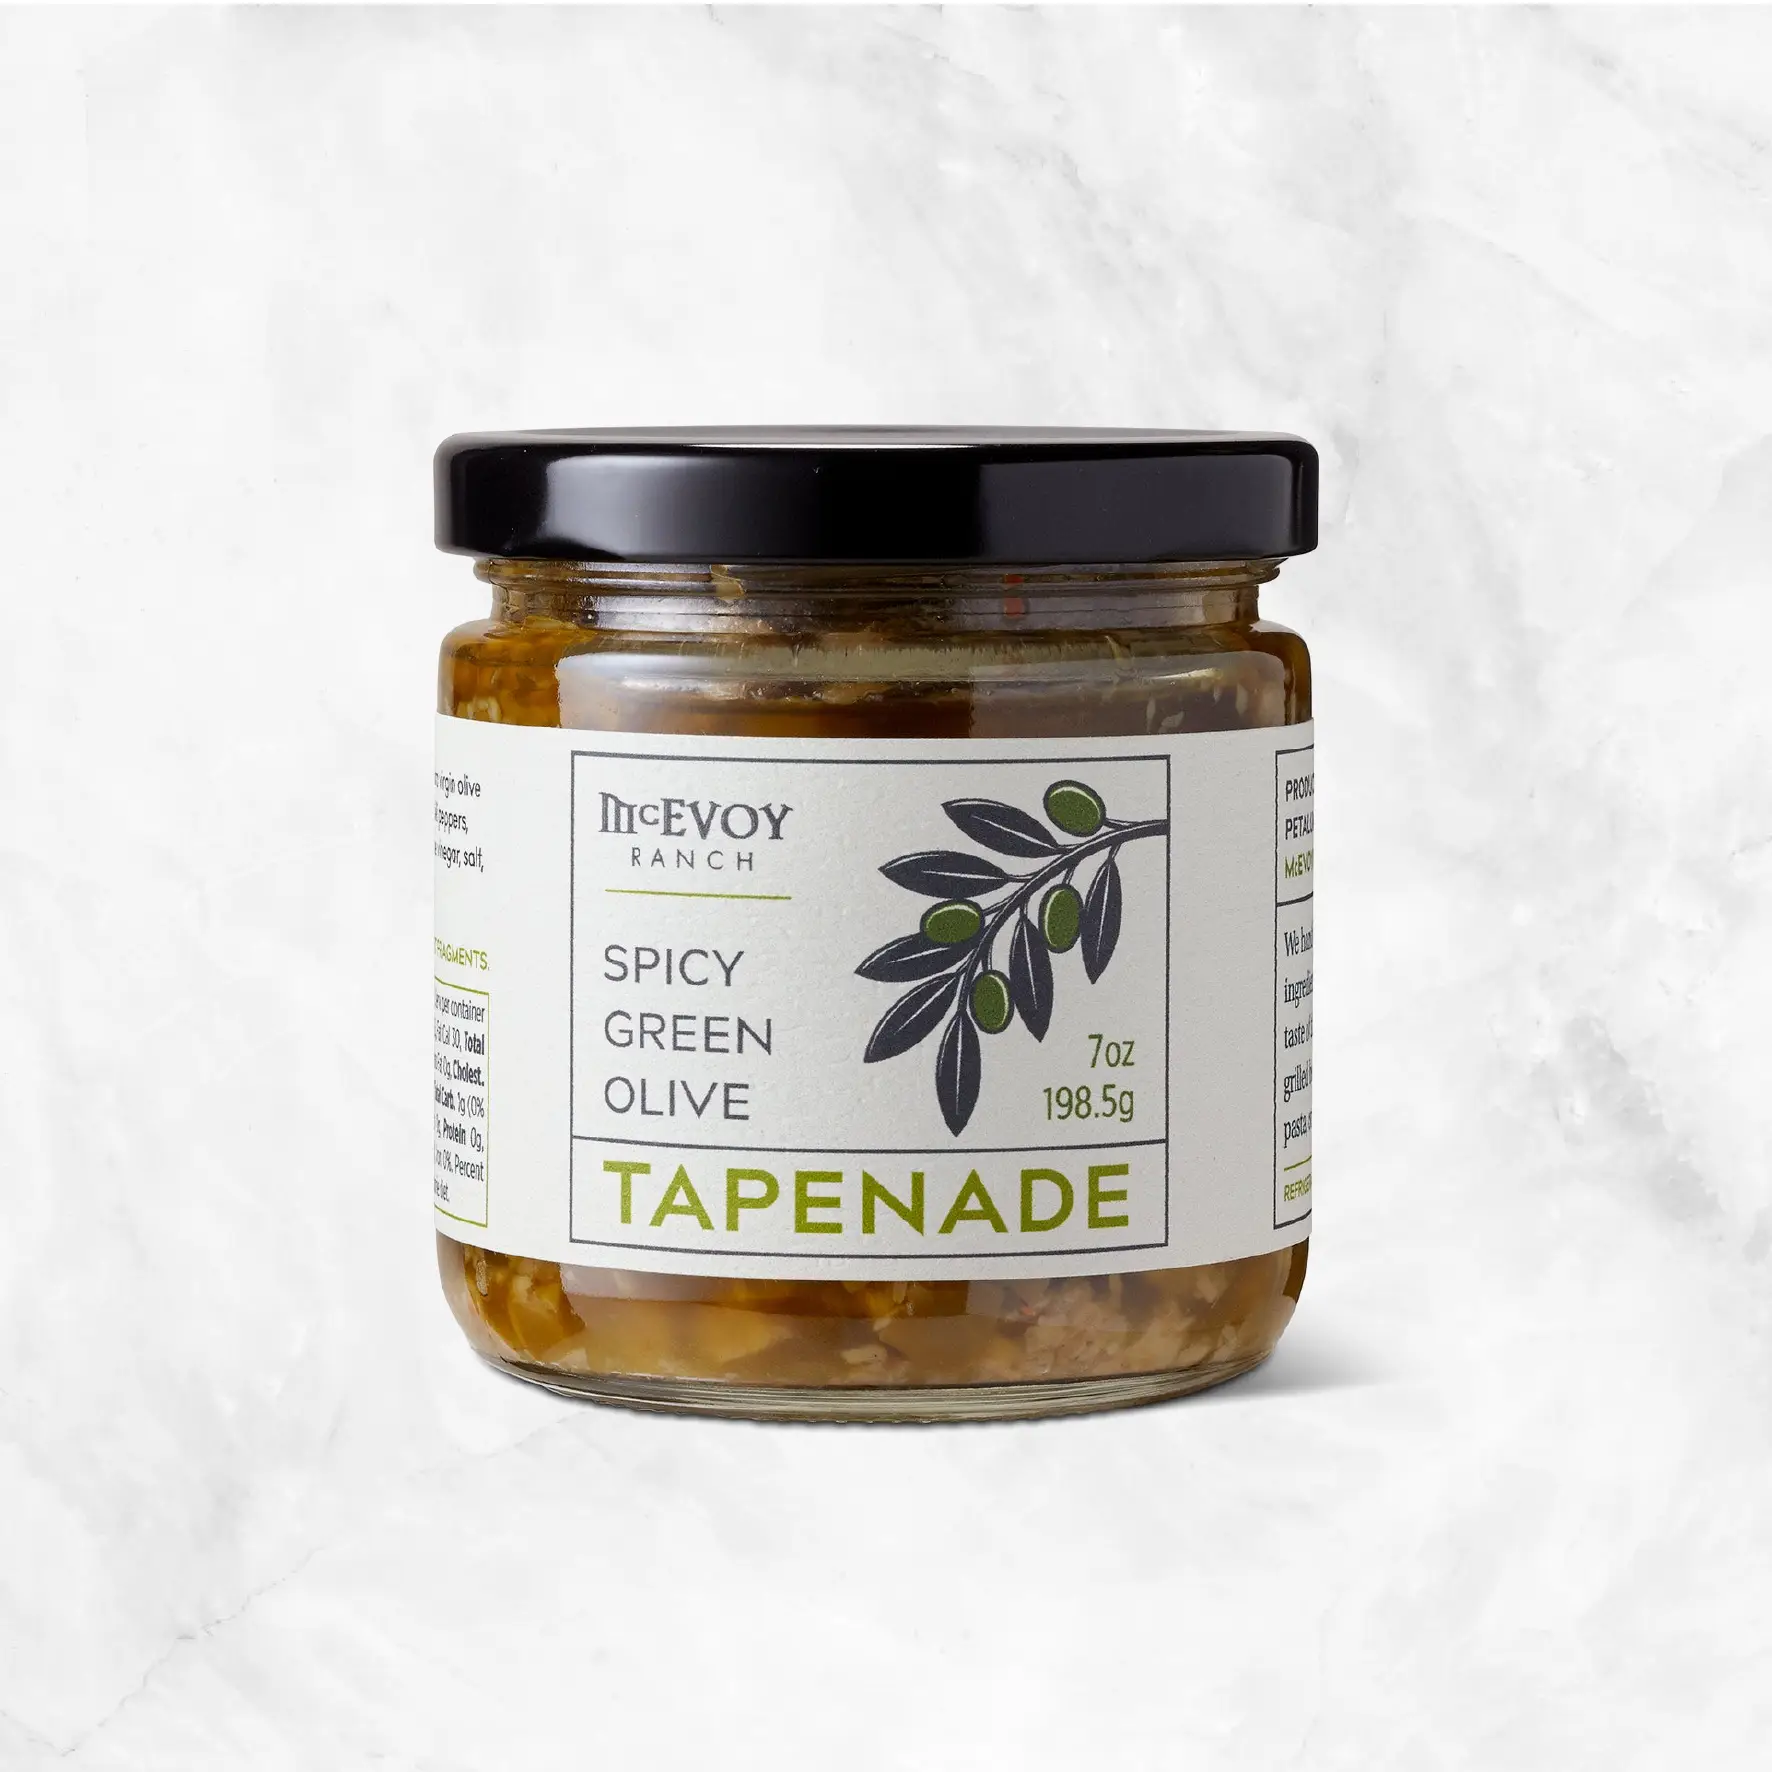 Spicy Green Olive Tapenade Delivery